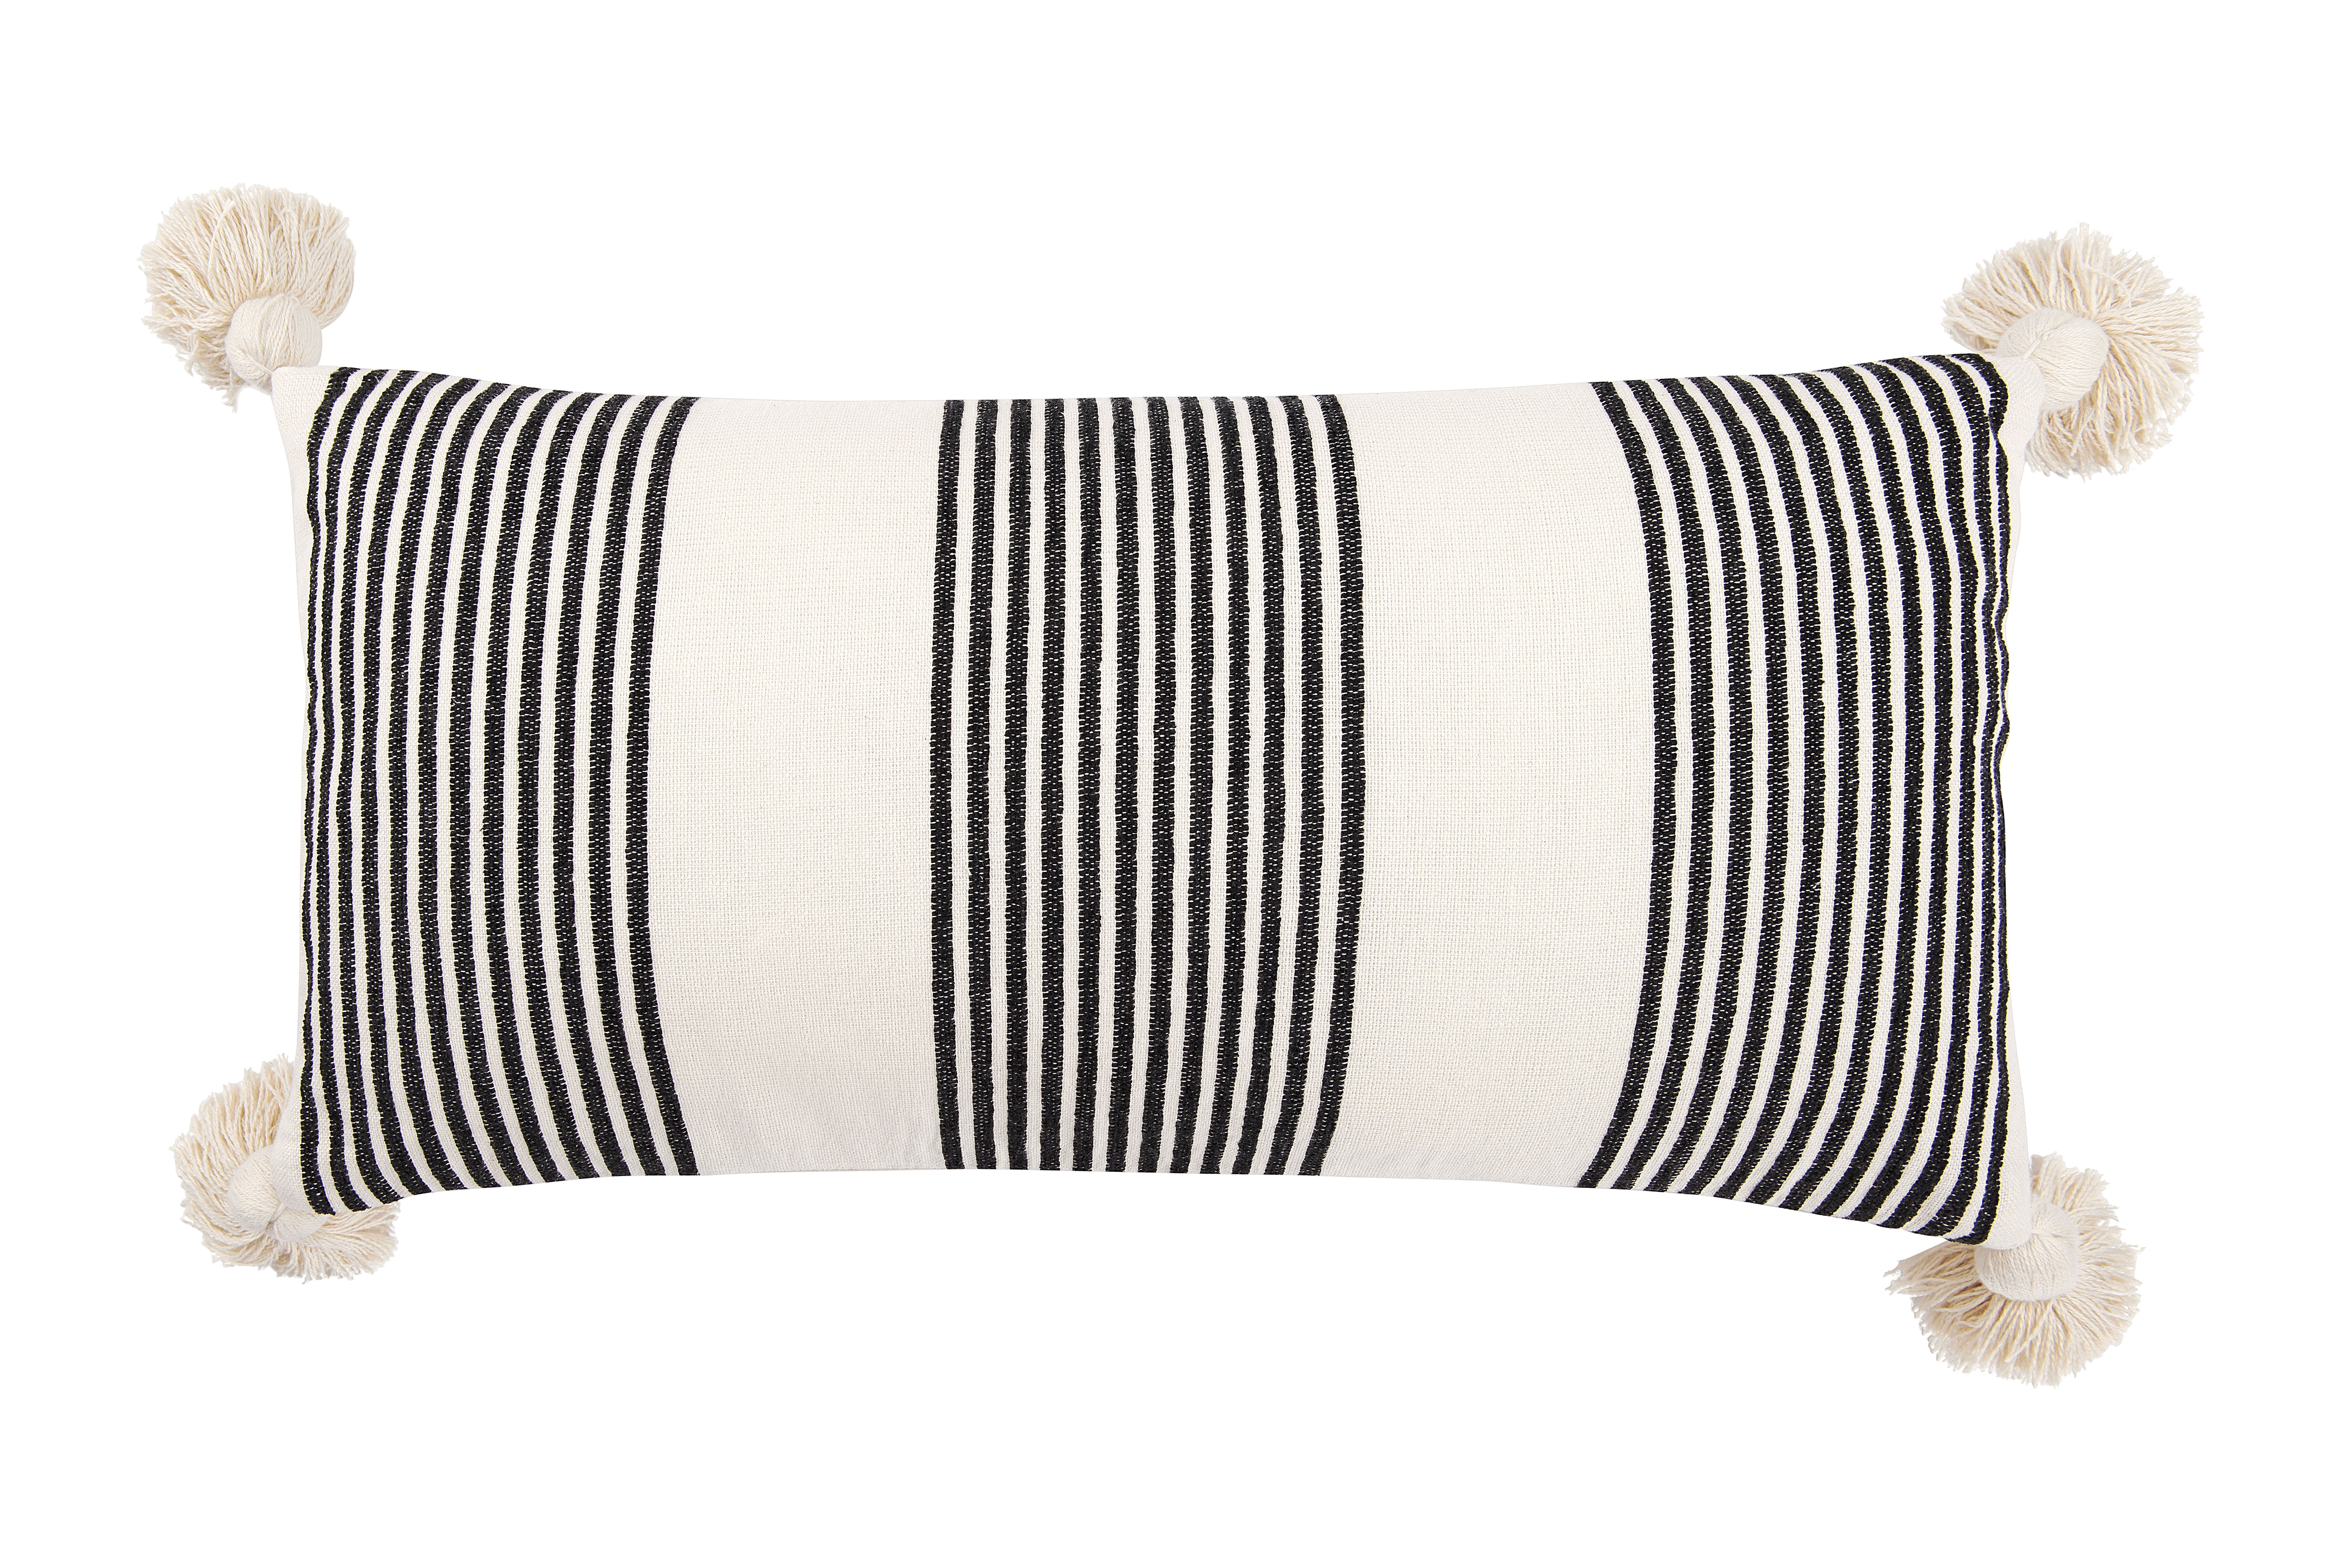 Cream Cotton & Chenille Pillow with Vertical Black Stripes, Tassels & Solid Cream Back - Nomad Home